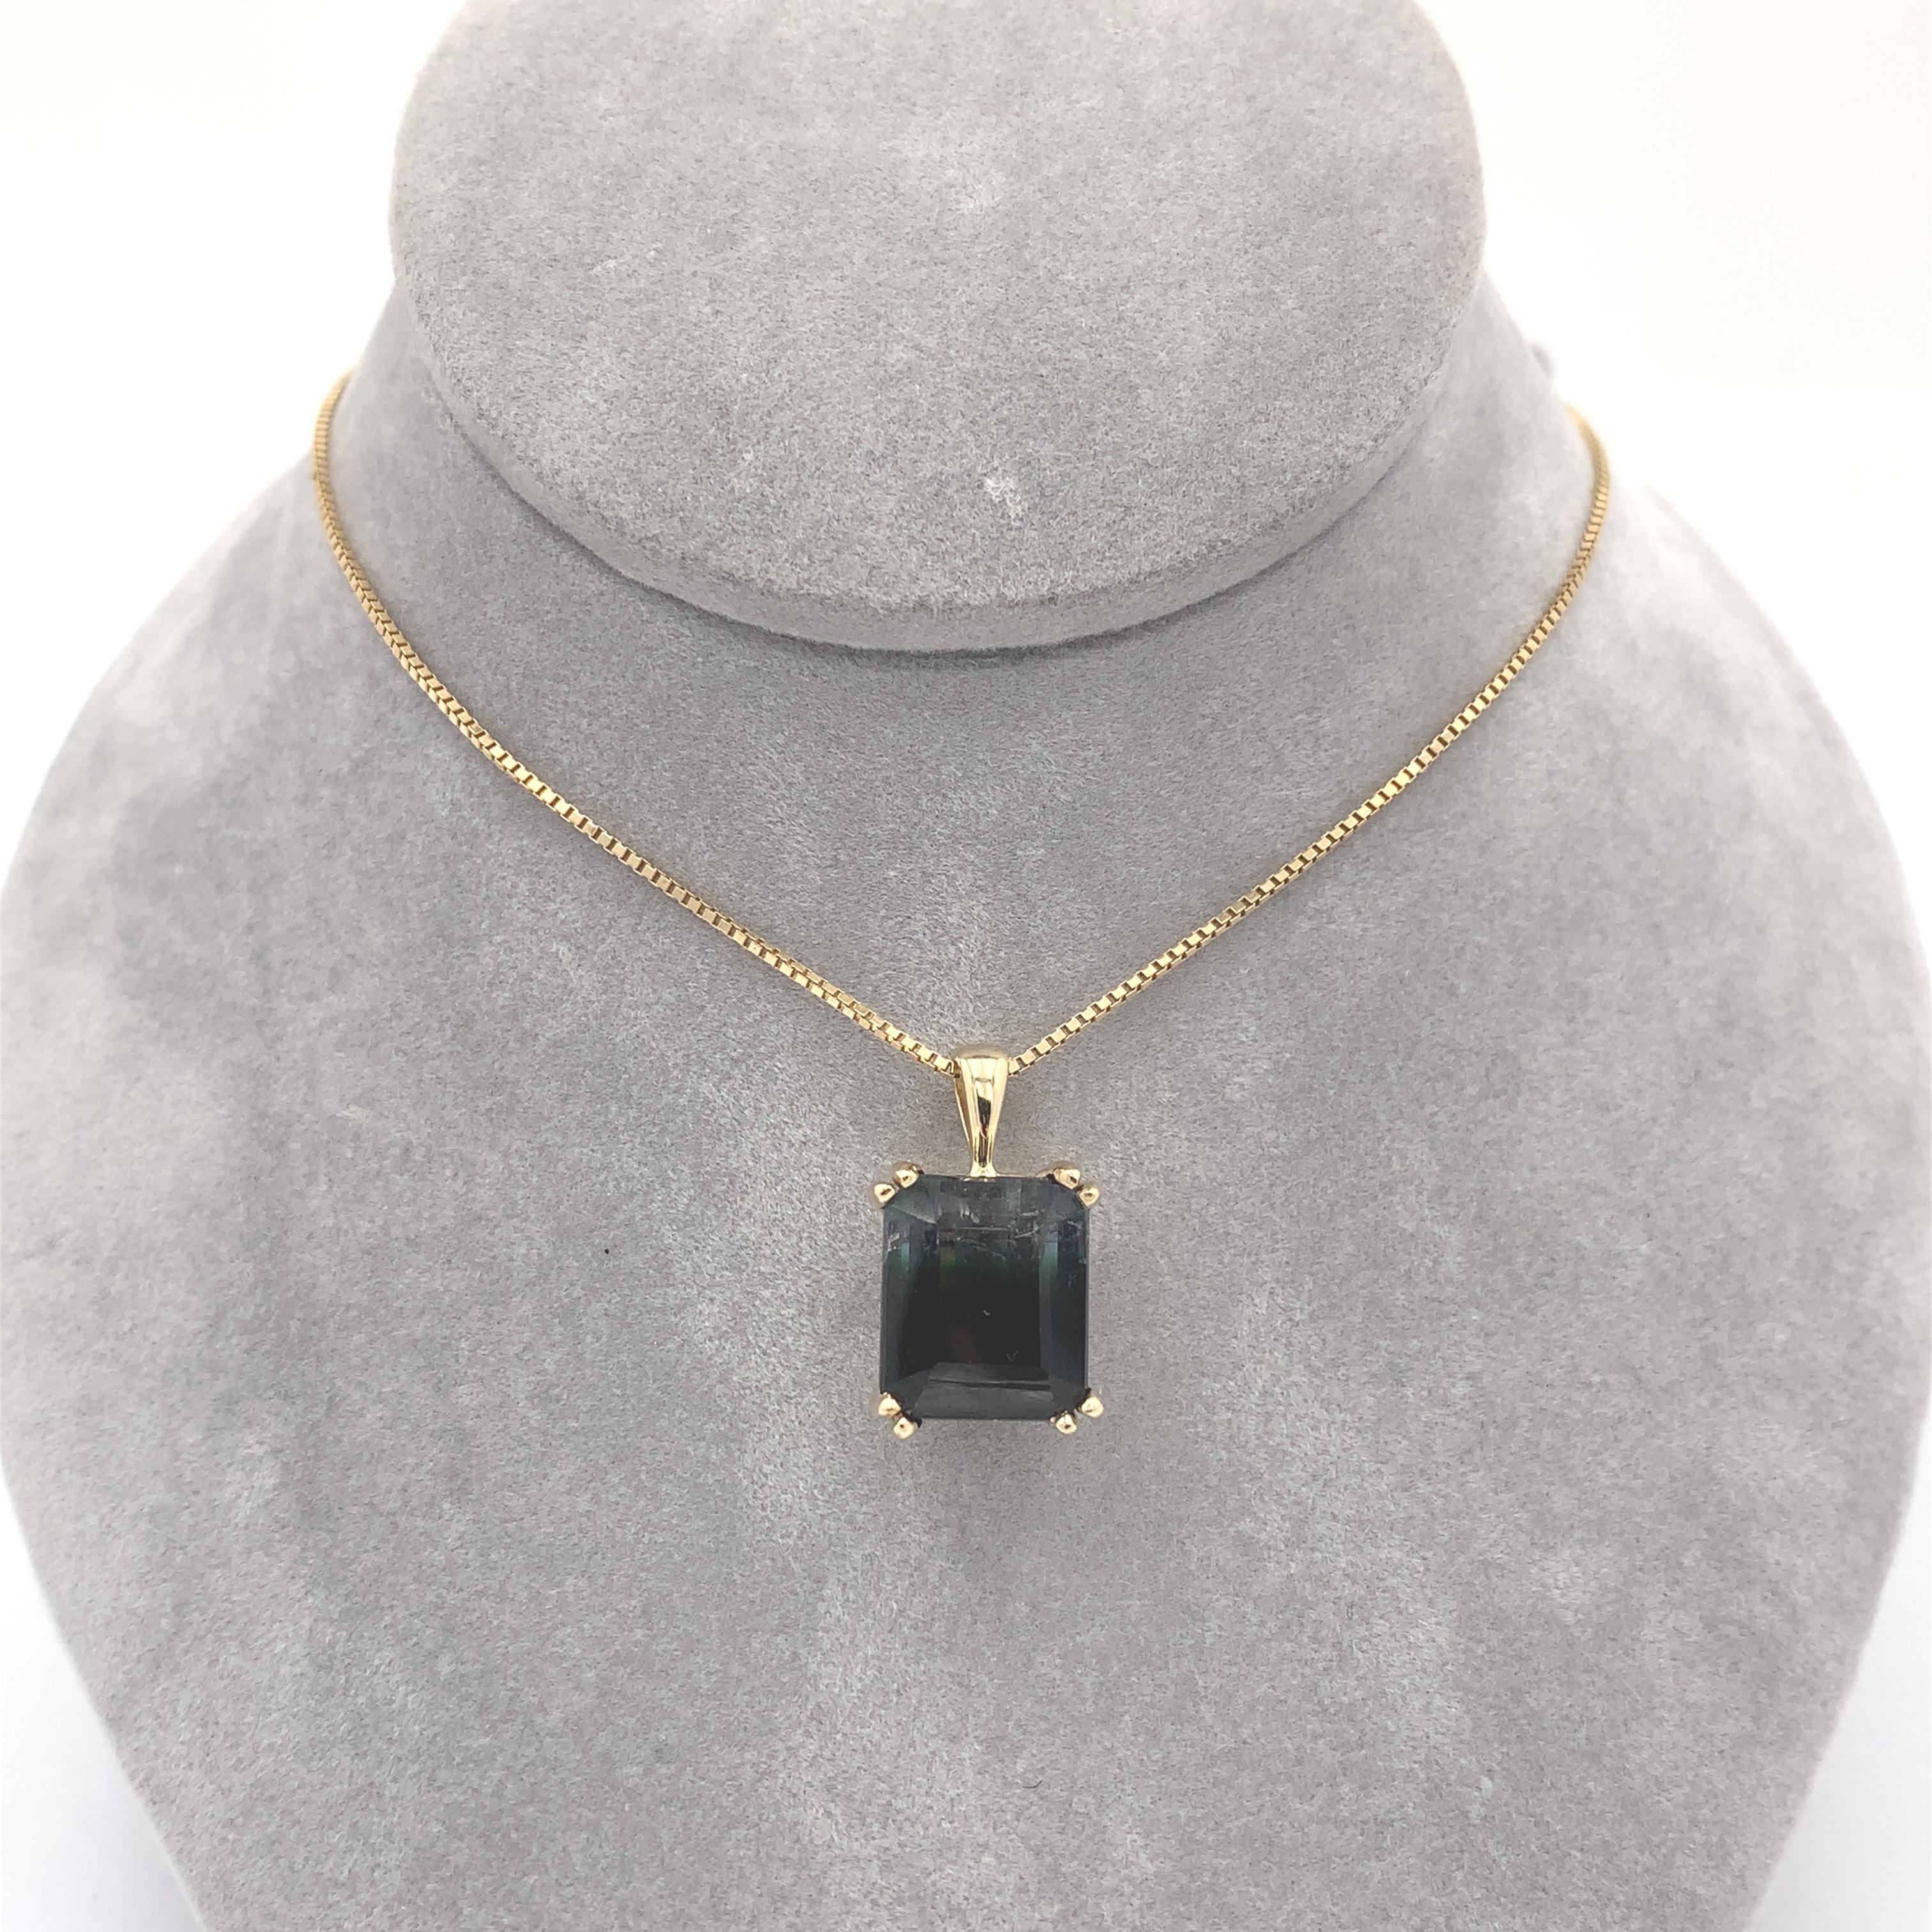 Women's 14K Yellow Gold 7.92 carat Bi-Color Tourmaline Pendant with chain For Sale